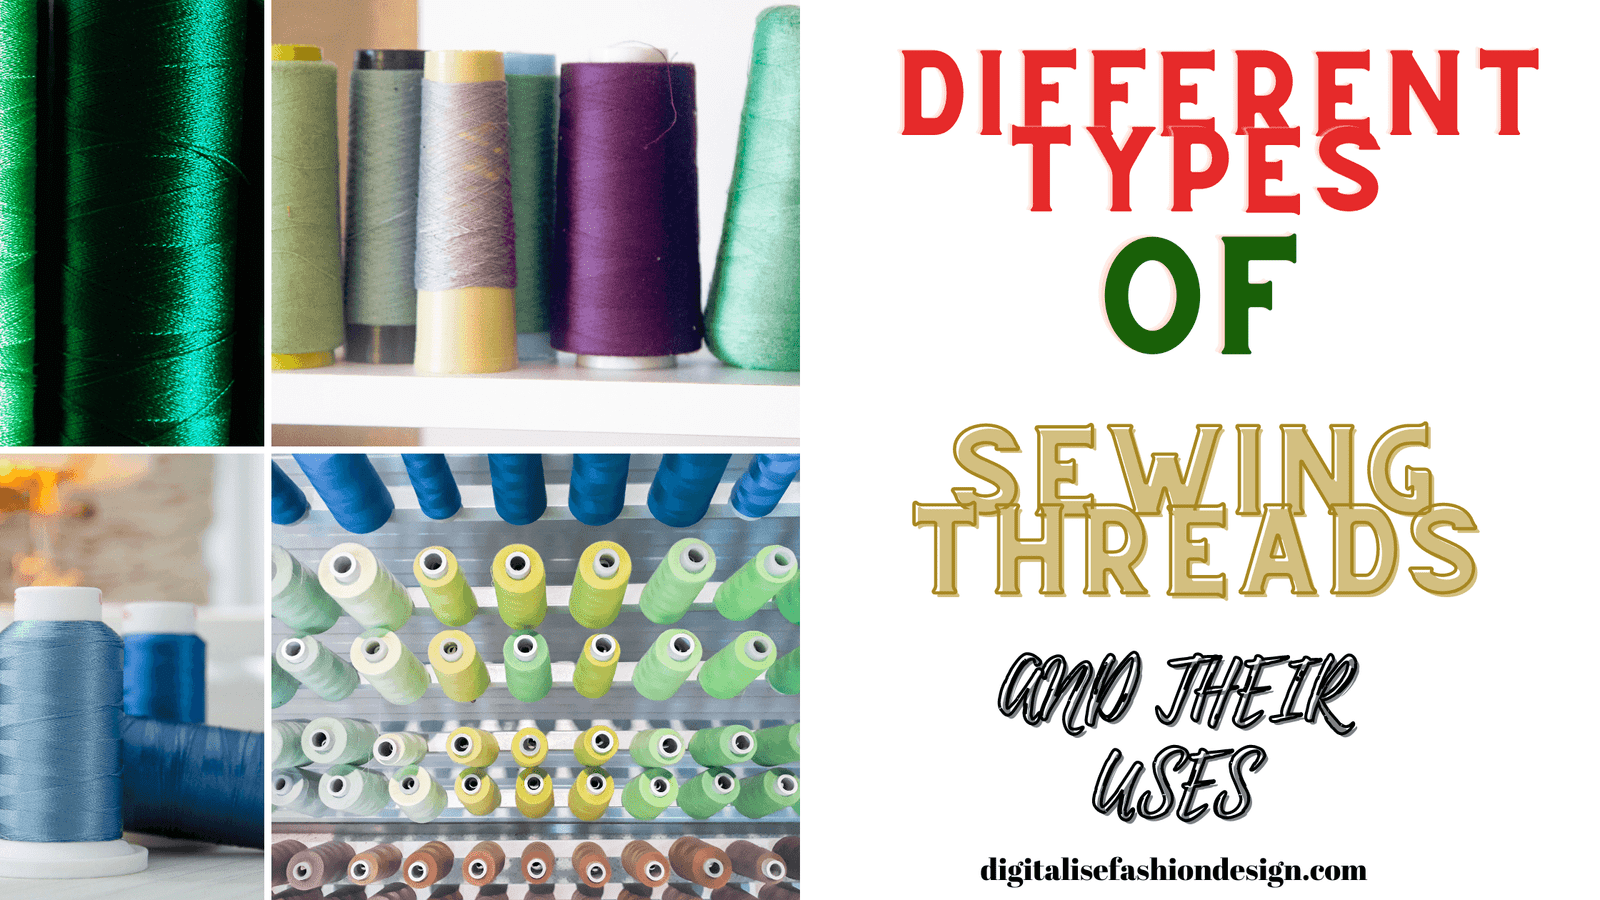 DIFFERENT TYPES OF SEWING THREADS AND THEIR USES: - SEWING PATTERNS